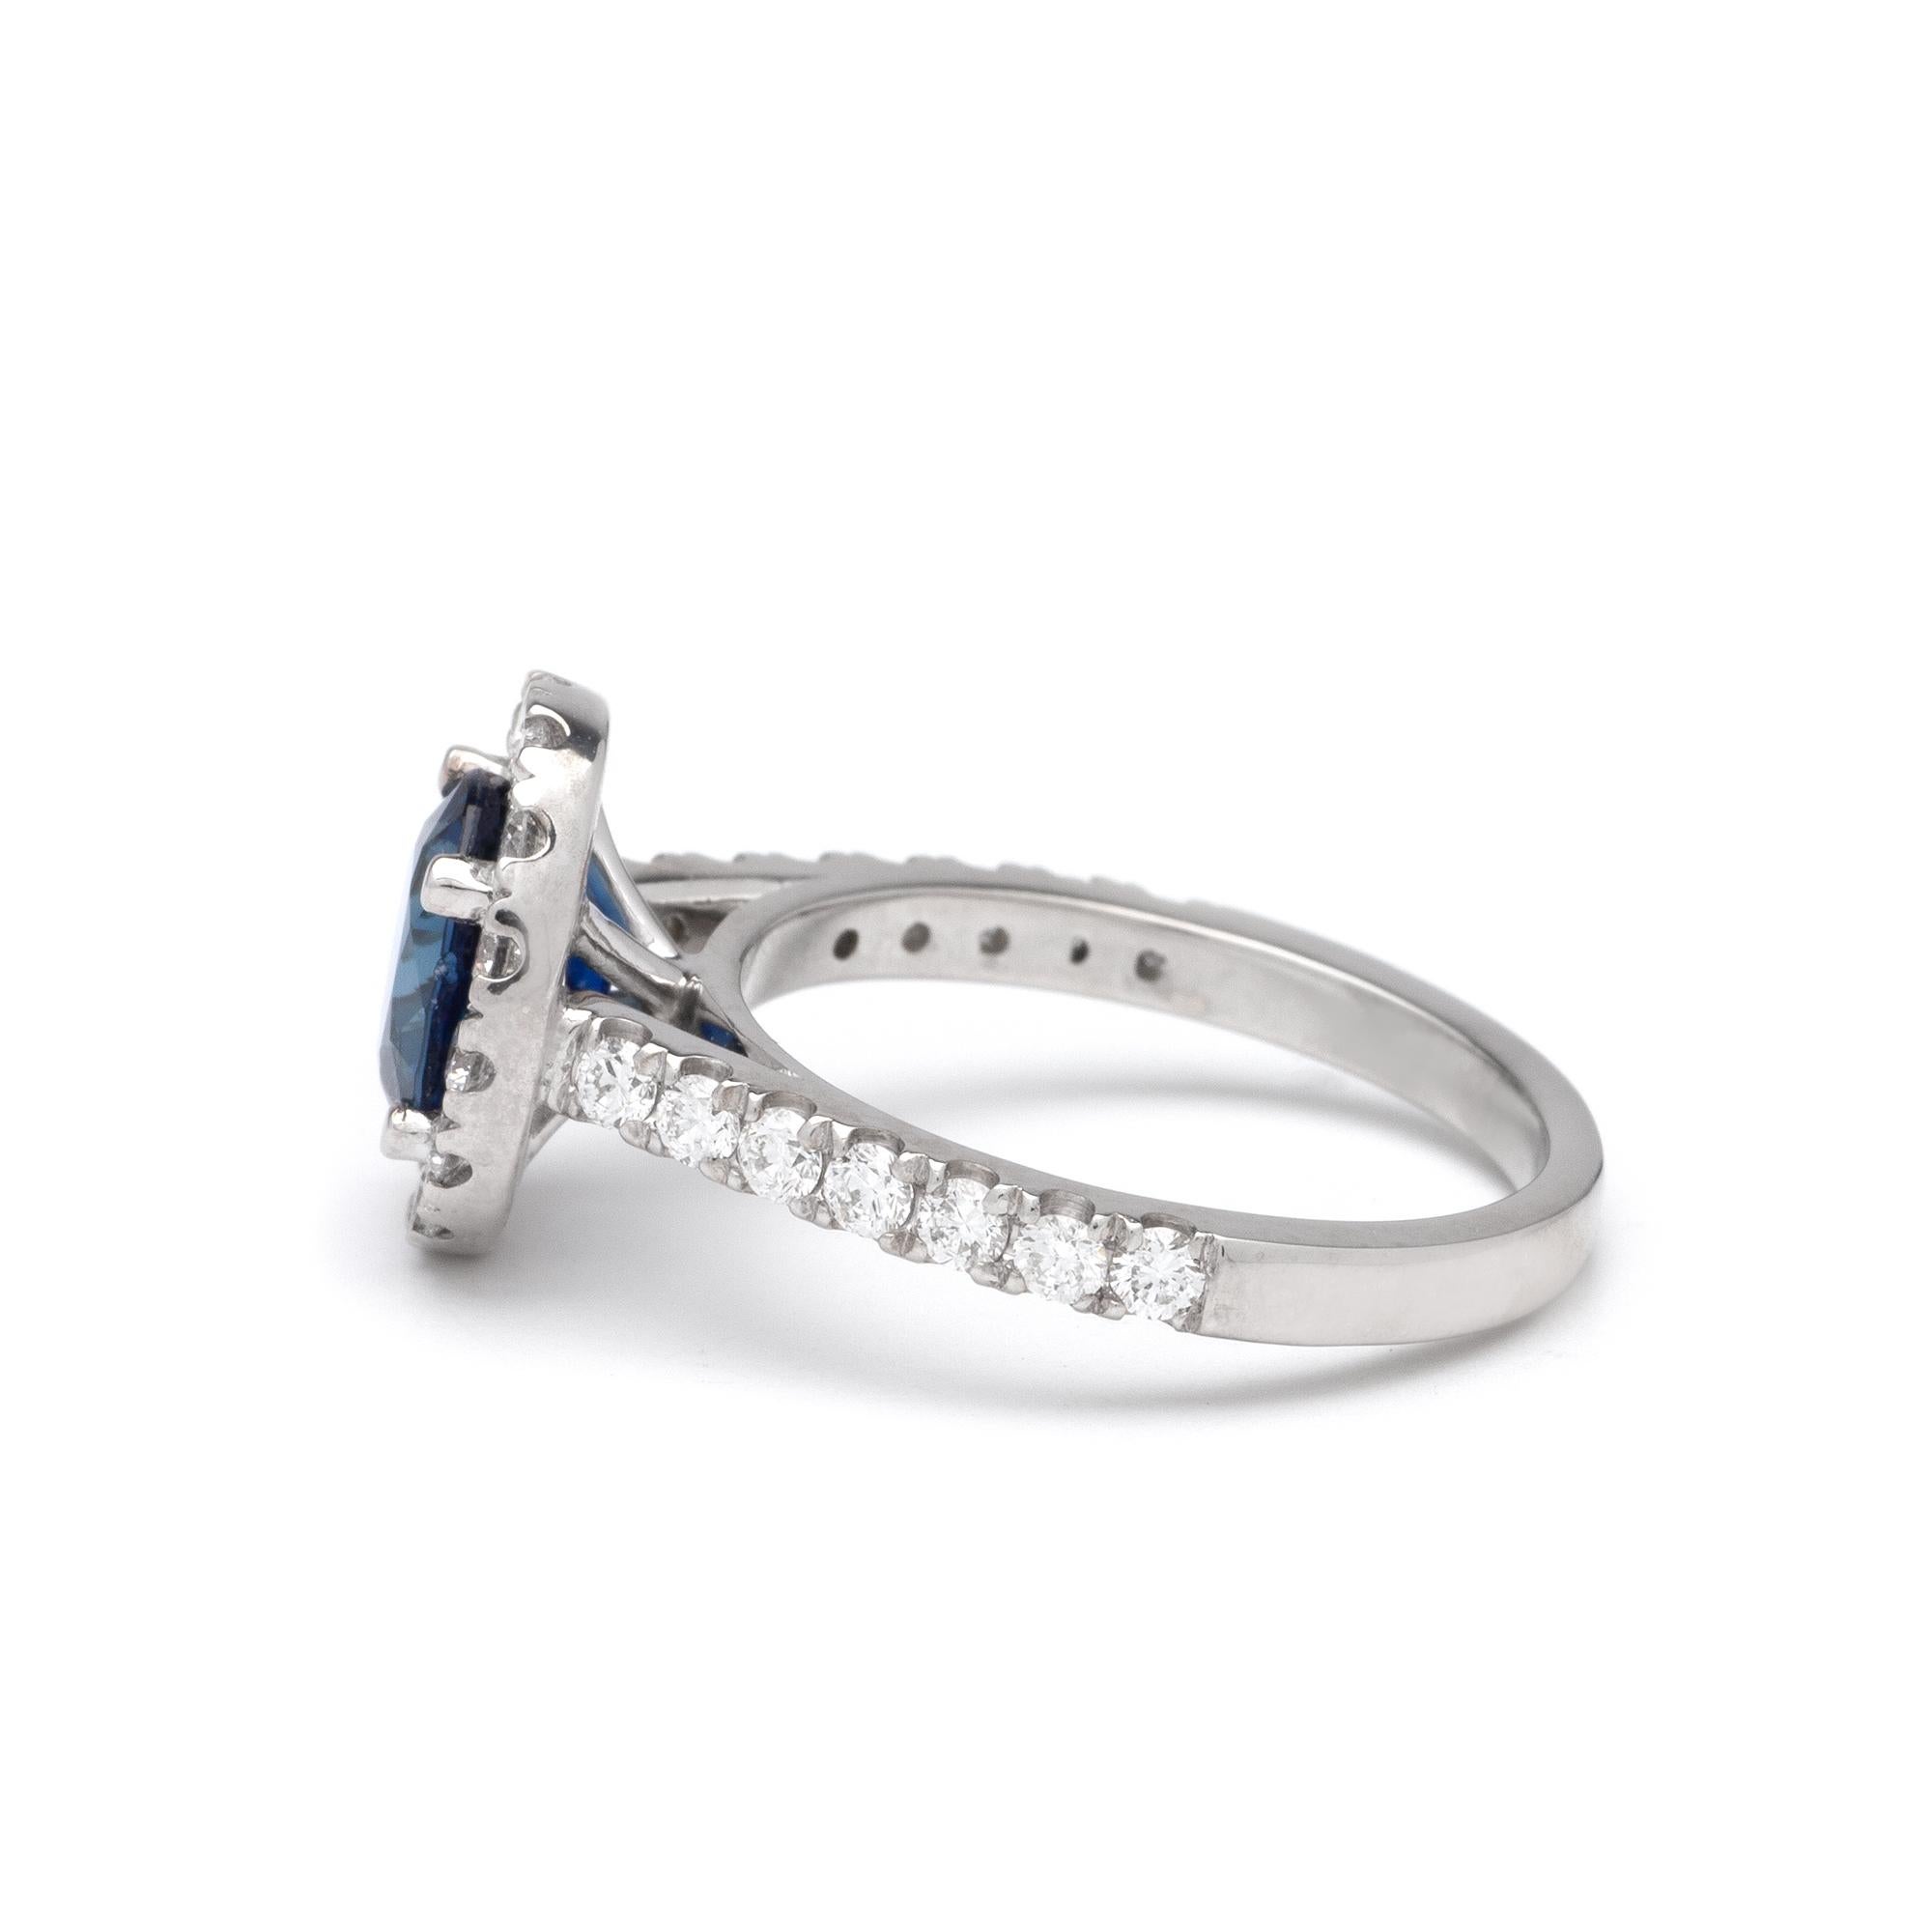 This ring features a halo design of G color, SI1 clarity, and 1.11ct Round side diamonds set in 14K white gold. The center gemstone is a 2.20ct Oval blue sapphire measuring 8.17 x 7.00mm. Finger size 6 1/2 with free resizing.